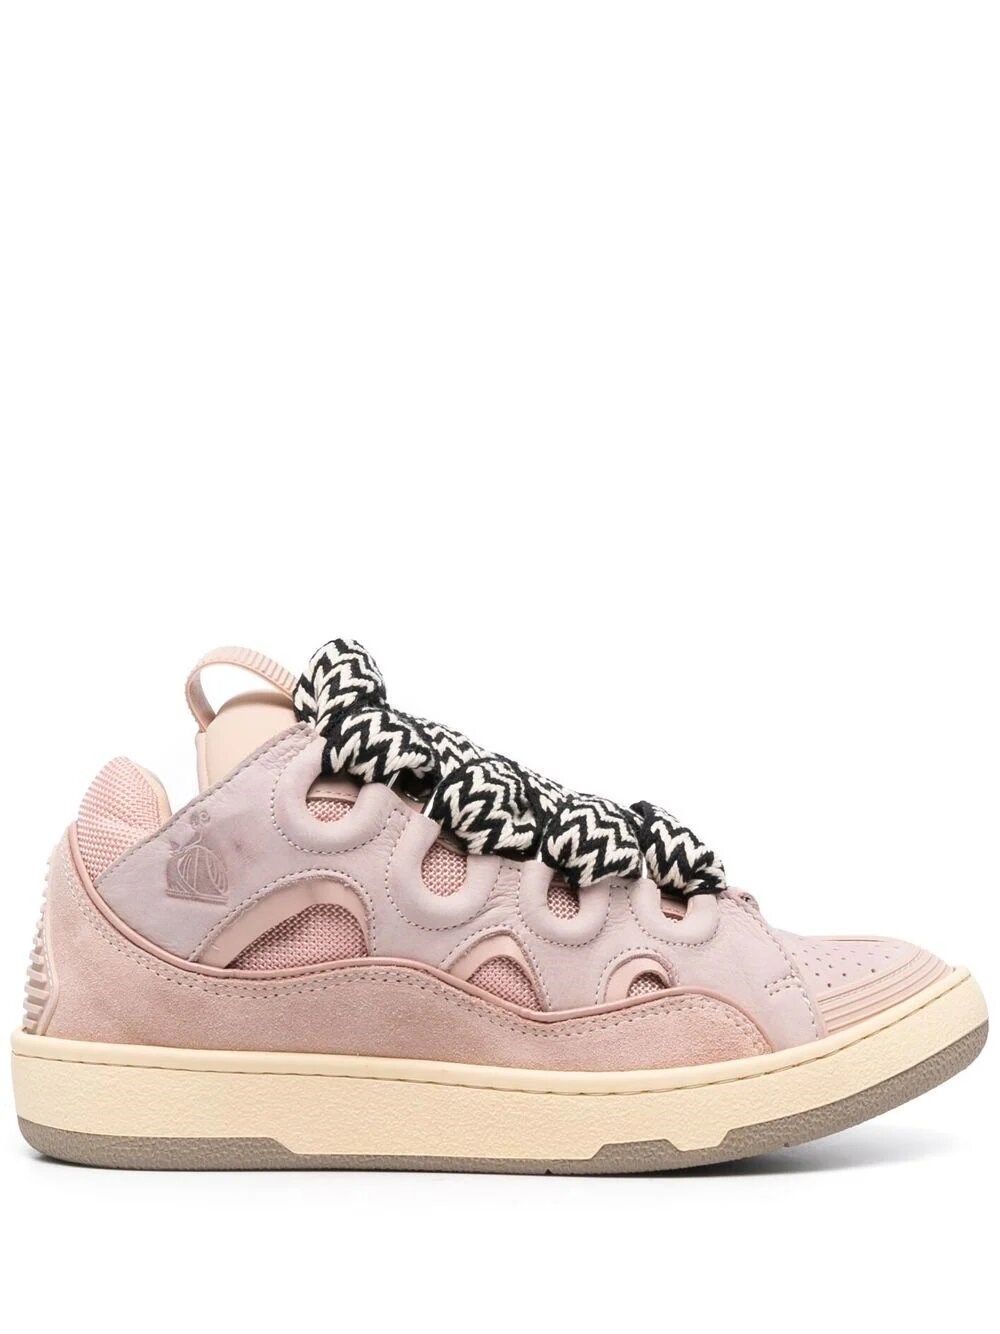 Lanvin Curb Light Sneakers In Pink